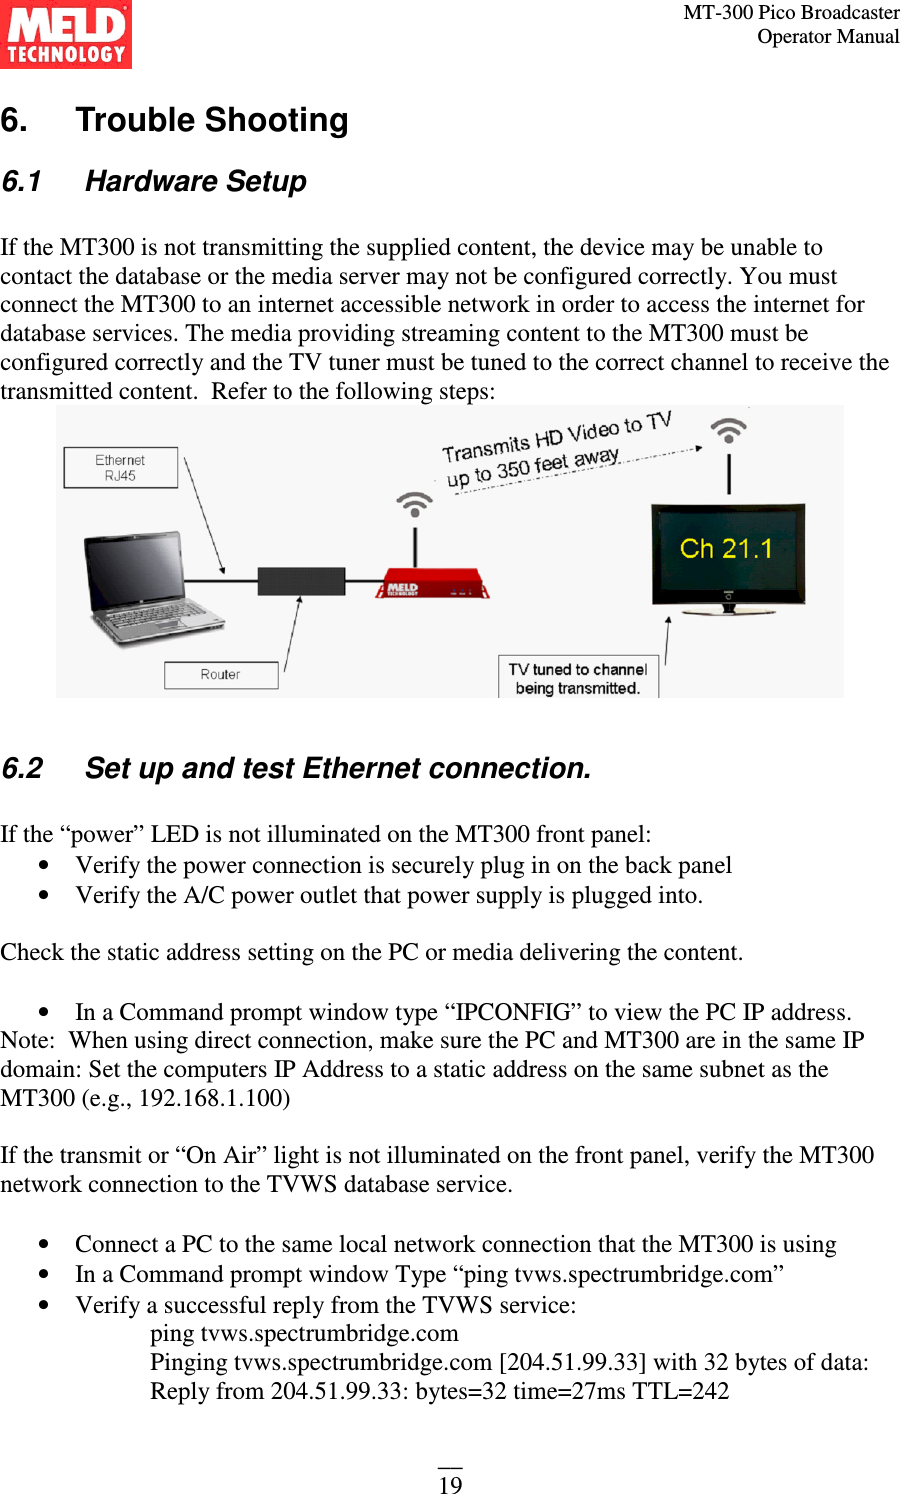 MT-300 Pico Broadcaster                                                                                                                                             Operator Manual __ 19 6.   Trouble Shooting 6.1   Hardware Setup  If the MT300 is not transmitting the supplied content, the device may be unable to contact the database or the media server may not be configured correctly. You must connect the MT300 to an internet accessible network in order to access the internet for database services. The media providing streaming content to the MT300 must be configured correctly and the TV tuner must be tuned to the correct channel to receive the transmitted content.  Refer to the following steps:   6.2   Set up and test Ethernet connection.  If the “power” LED is not illuminated on the MT300 front panel: • Verify the power connection is securely plug in on the back panel • Verify the A/C power outlet that power supply is plugged into.  Check the static address setting on the PC or media delivering the content.   • In a Command prompt window type “IPCONFIG” to view the PC IP address.  Note:  When using direct connection, make sure the PC and MT300 are in the same IP domain: Set the computers IP Address to a static address on the same subnet as the MT300 (e.g., 192.168.1.100)  If the transmit or “On Air” light is not illuminated on the front panel, verify the MT300 network connection to the TVWS database service.  • Connect a PC to the same local network connection that the MT300 is using • In a Command prompt window Type “ping tvws.spectrumbridge.com” • Verify a successful reply from the TVWS service: ping tvws.spectrumbridge.com Pinging tvws.spectrumbridge.com [204.51.99.33] with 32 bytes of data: Reply from 204.51.99.33: bytes=32 time=27ms TTL=242 